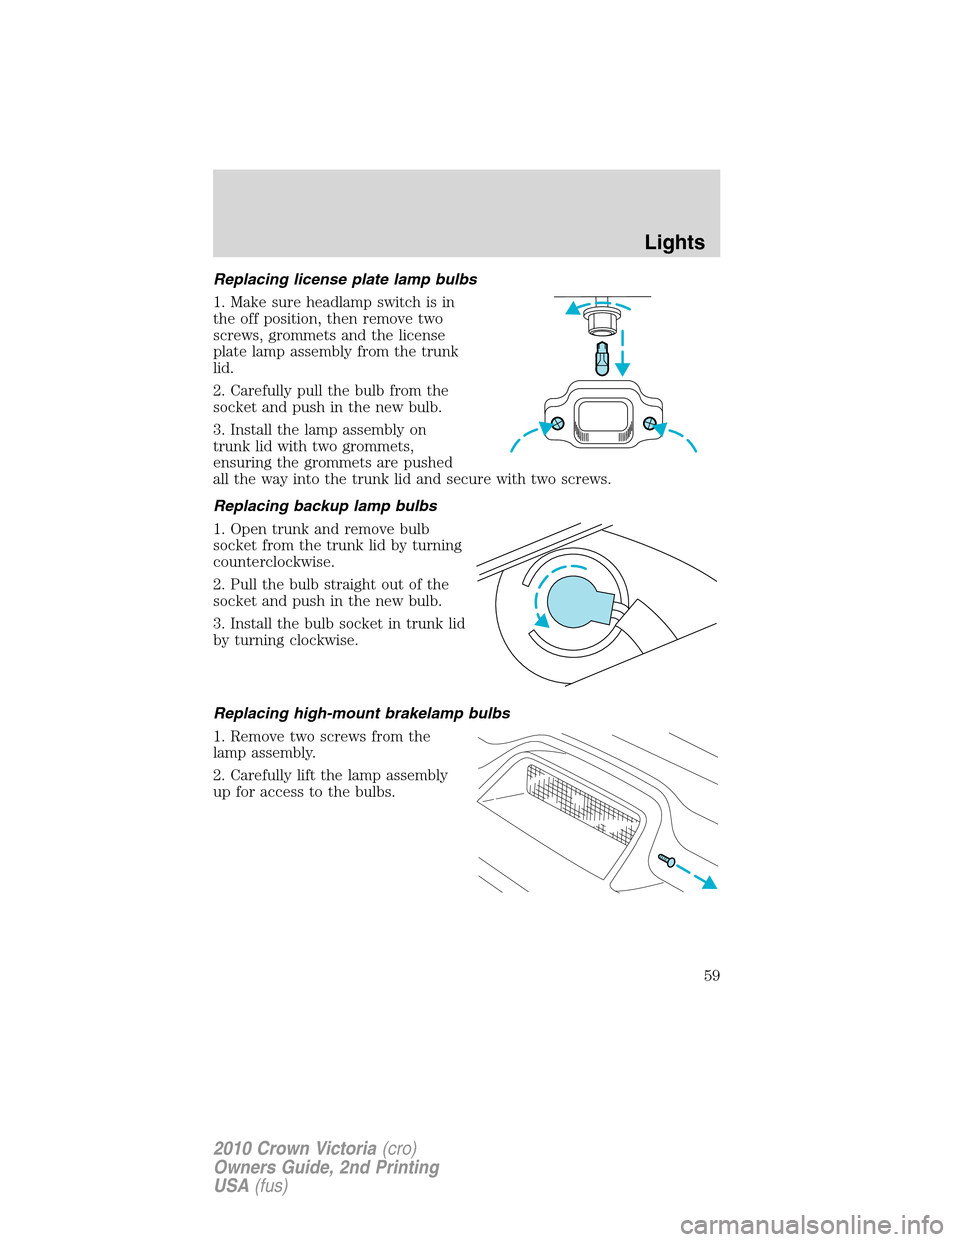 Mercury Grand Marquis 2010  Owners Manuals Replacing license plate lamp bulbs
1. Make sure headlamp switch is in
the off position, then remove two
screws, grommets and the license
plate lamp assembly from the trunk
lid.
2. Carefully pull the b